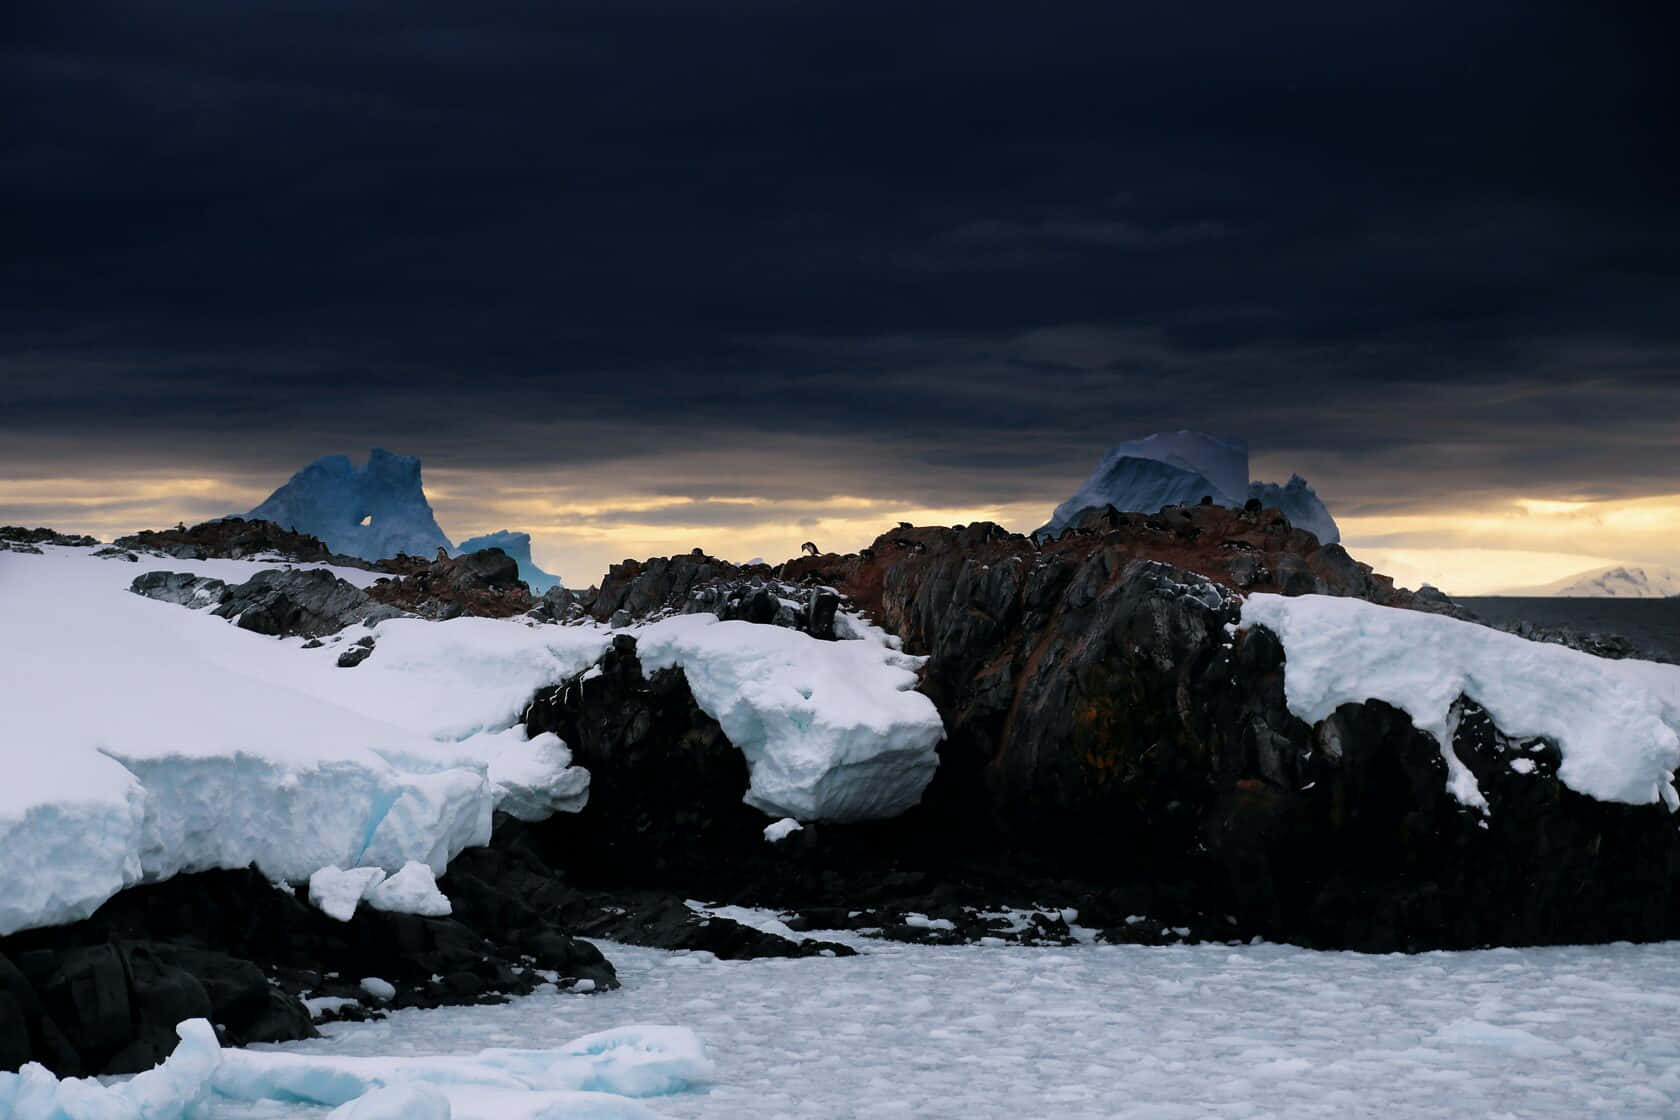 A Dark Sky Over A Rocky Shore With Ice And Rocks